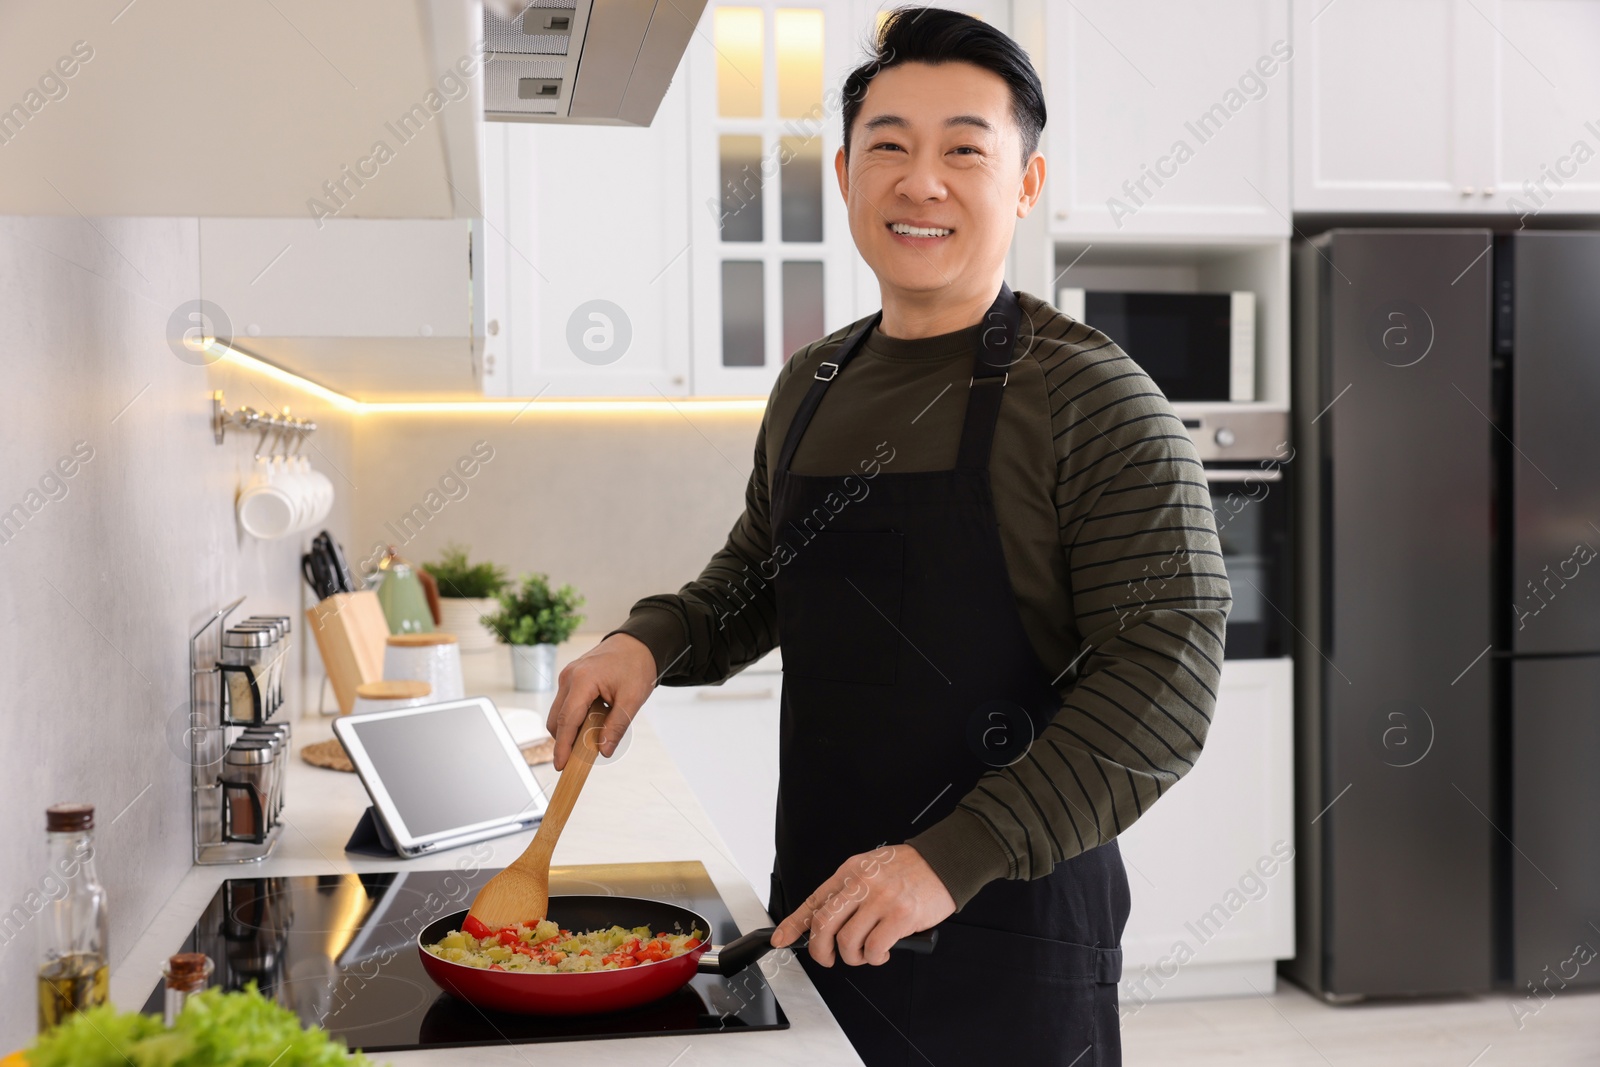 Photo of Happy man cooking dish on cooktop in kitchen